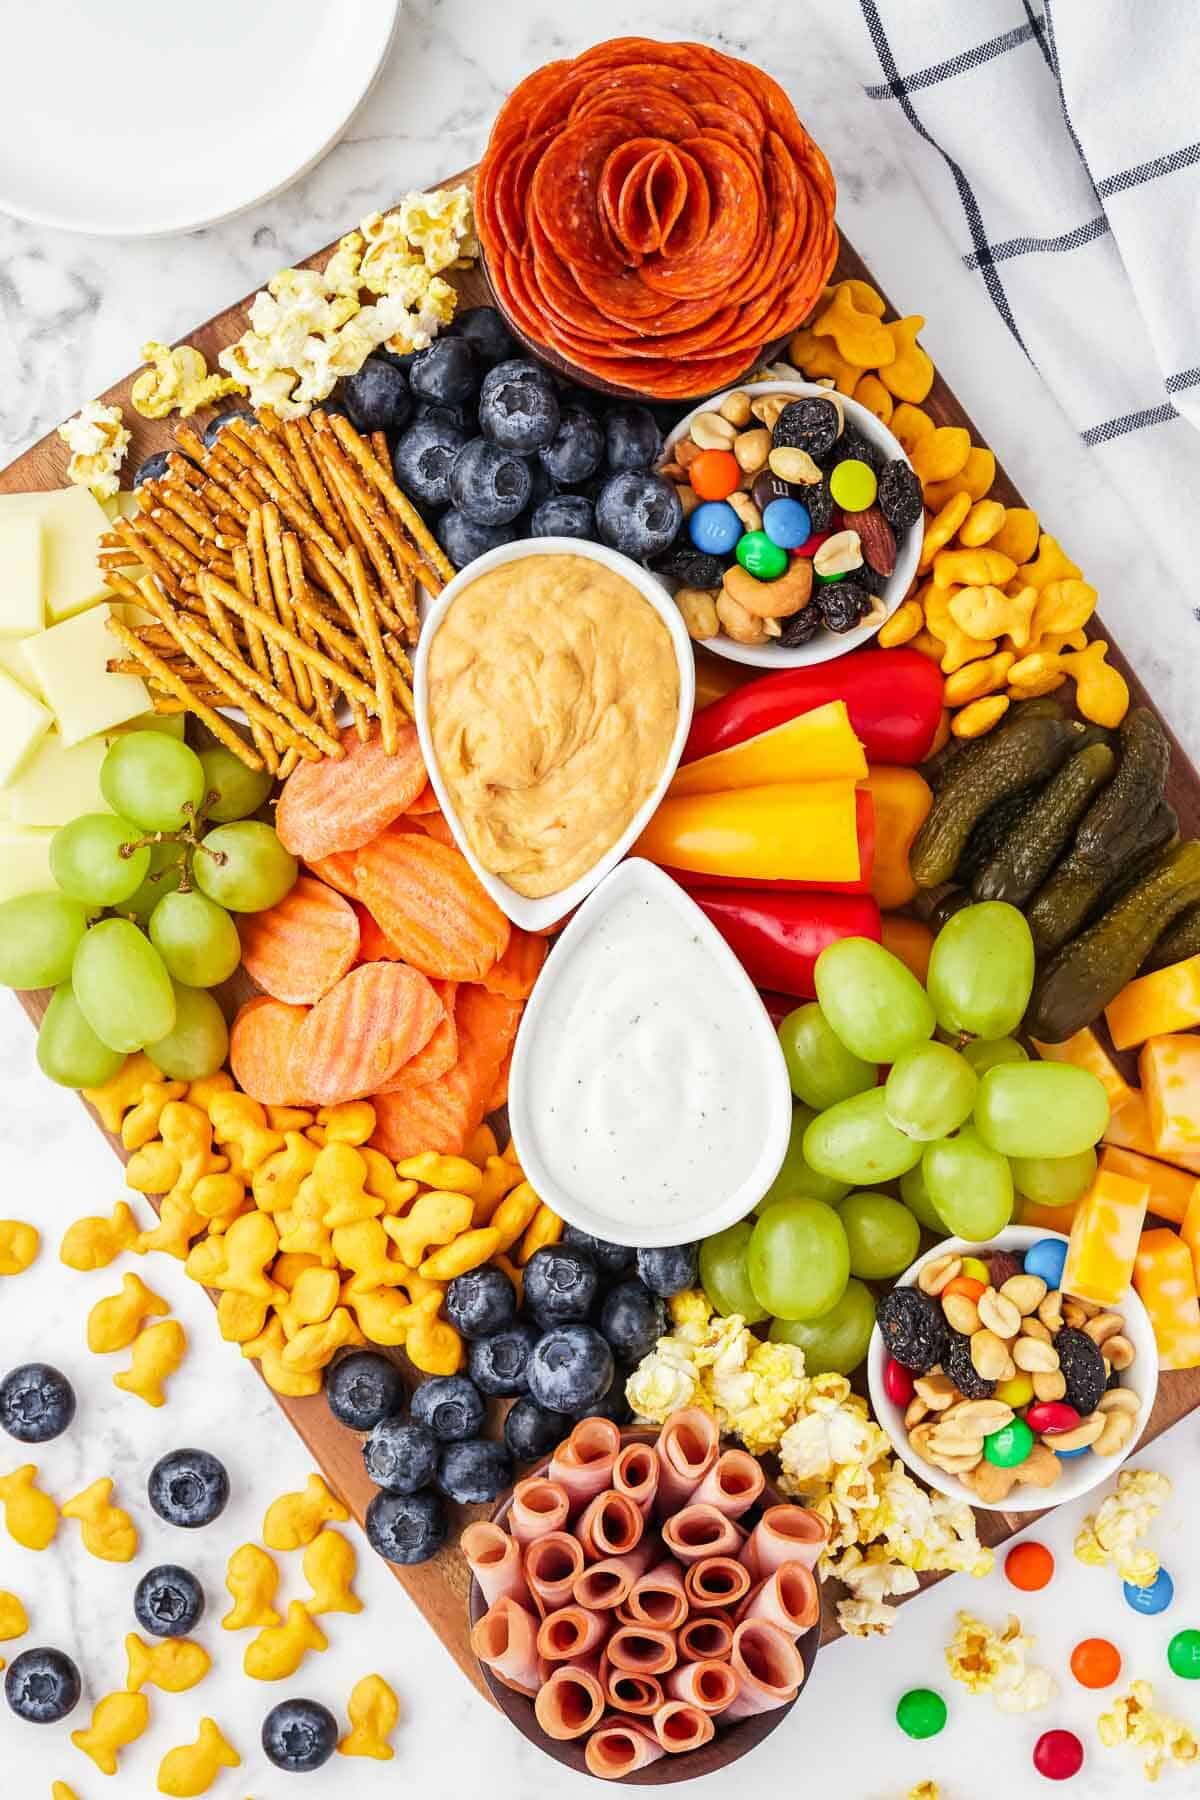 Kid's Charcuterie Board with fruit, crackers and dips on a large wooden board.